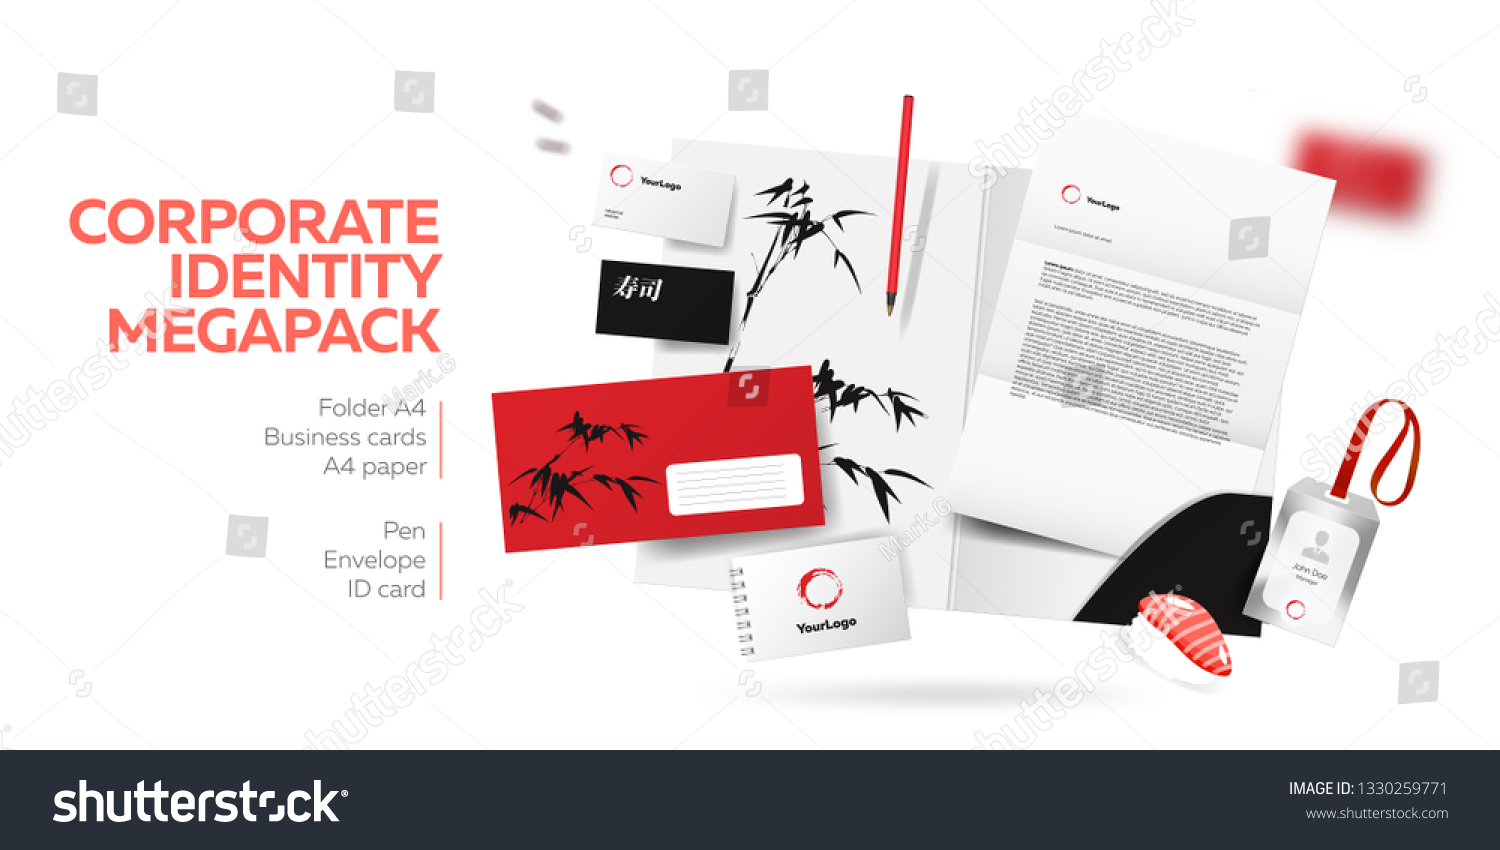 Download Corporate Branding Identity Design Stationery Mockup Stock Vector Royalty Free 1330259771 PSD Mockup Templates